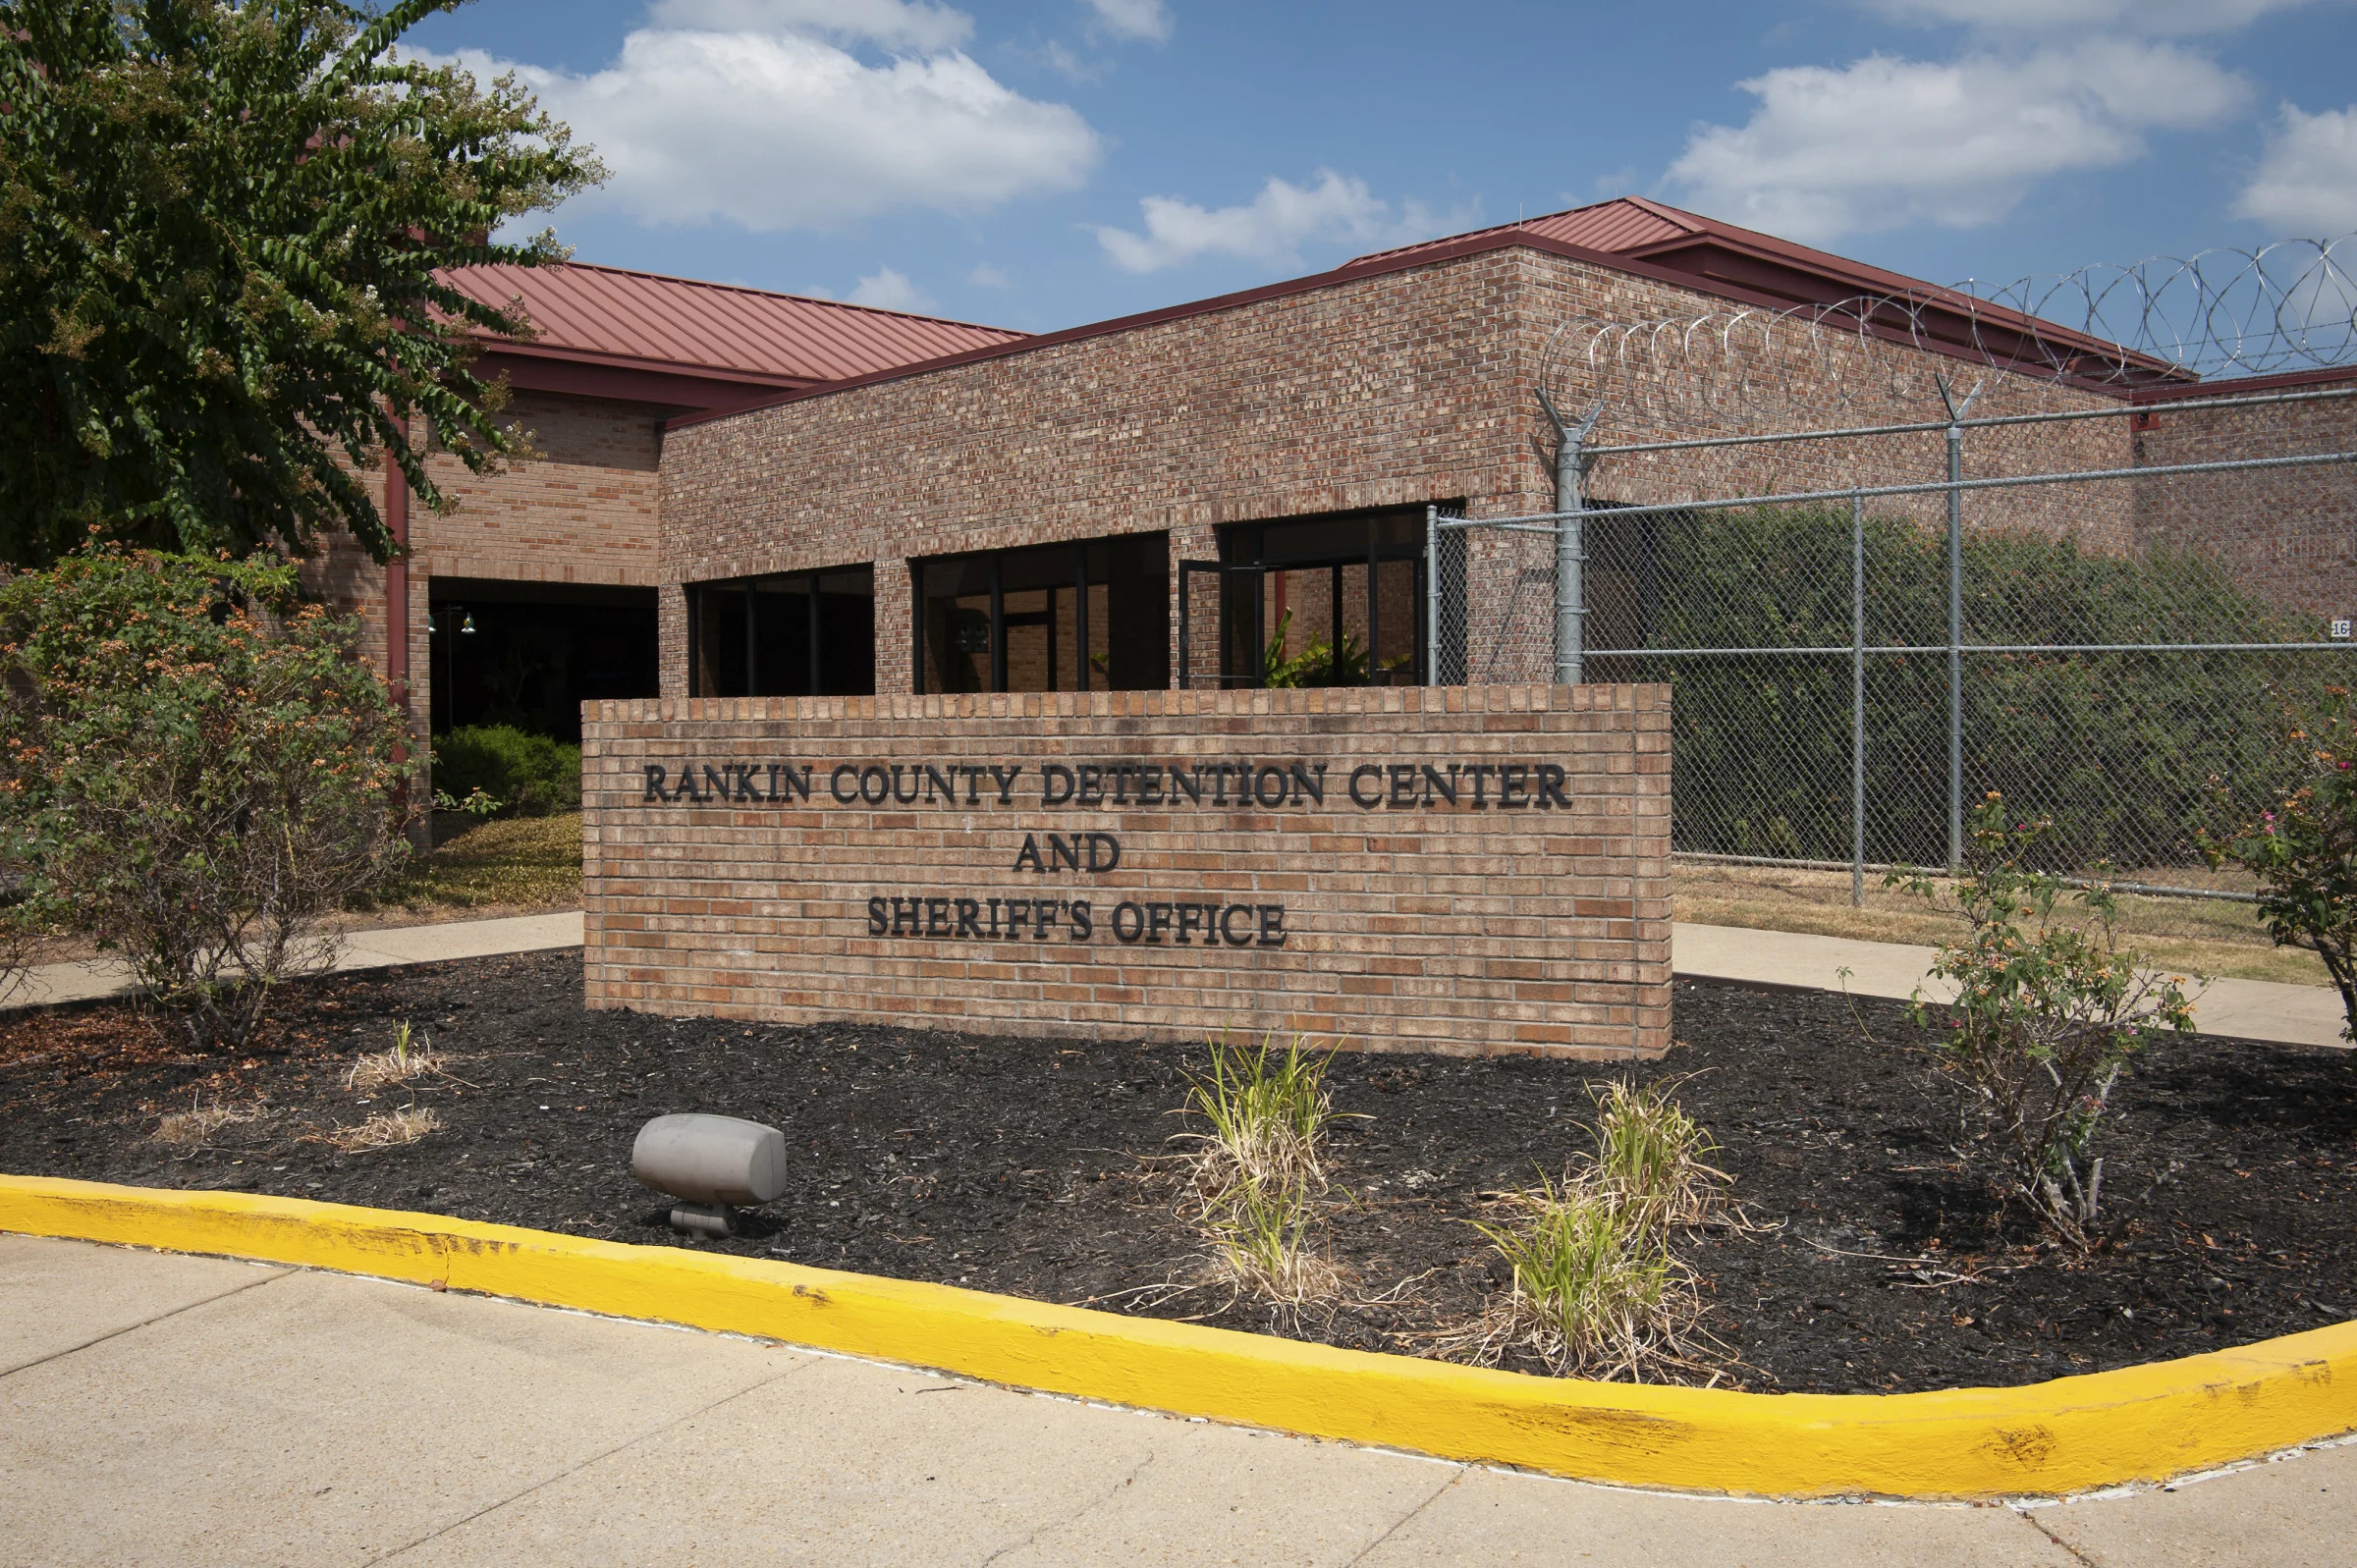 The Rankin County Detention Center in Brandon, Miss. on Aug. 23, 2023. (Rory Doyle/The New York Times)